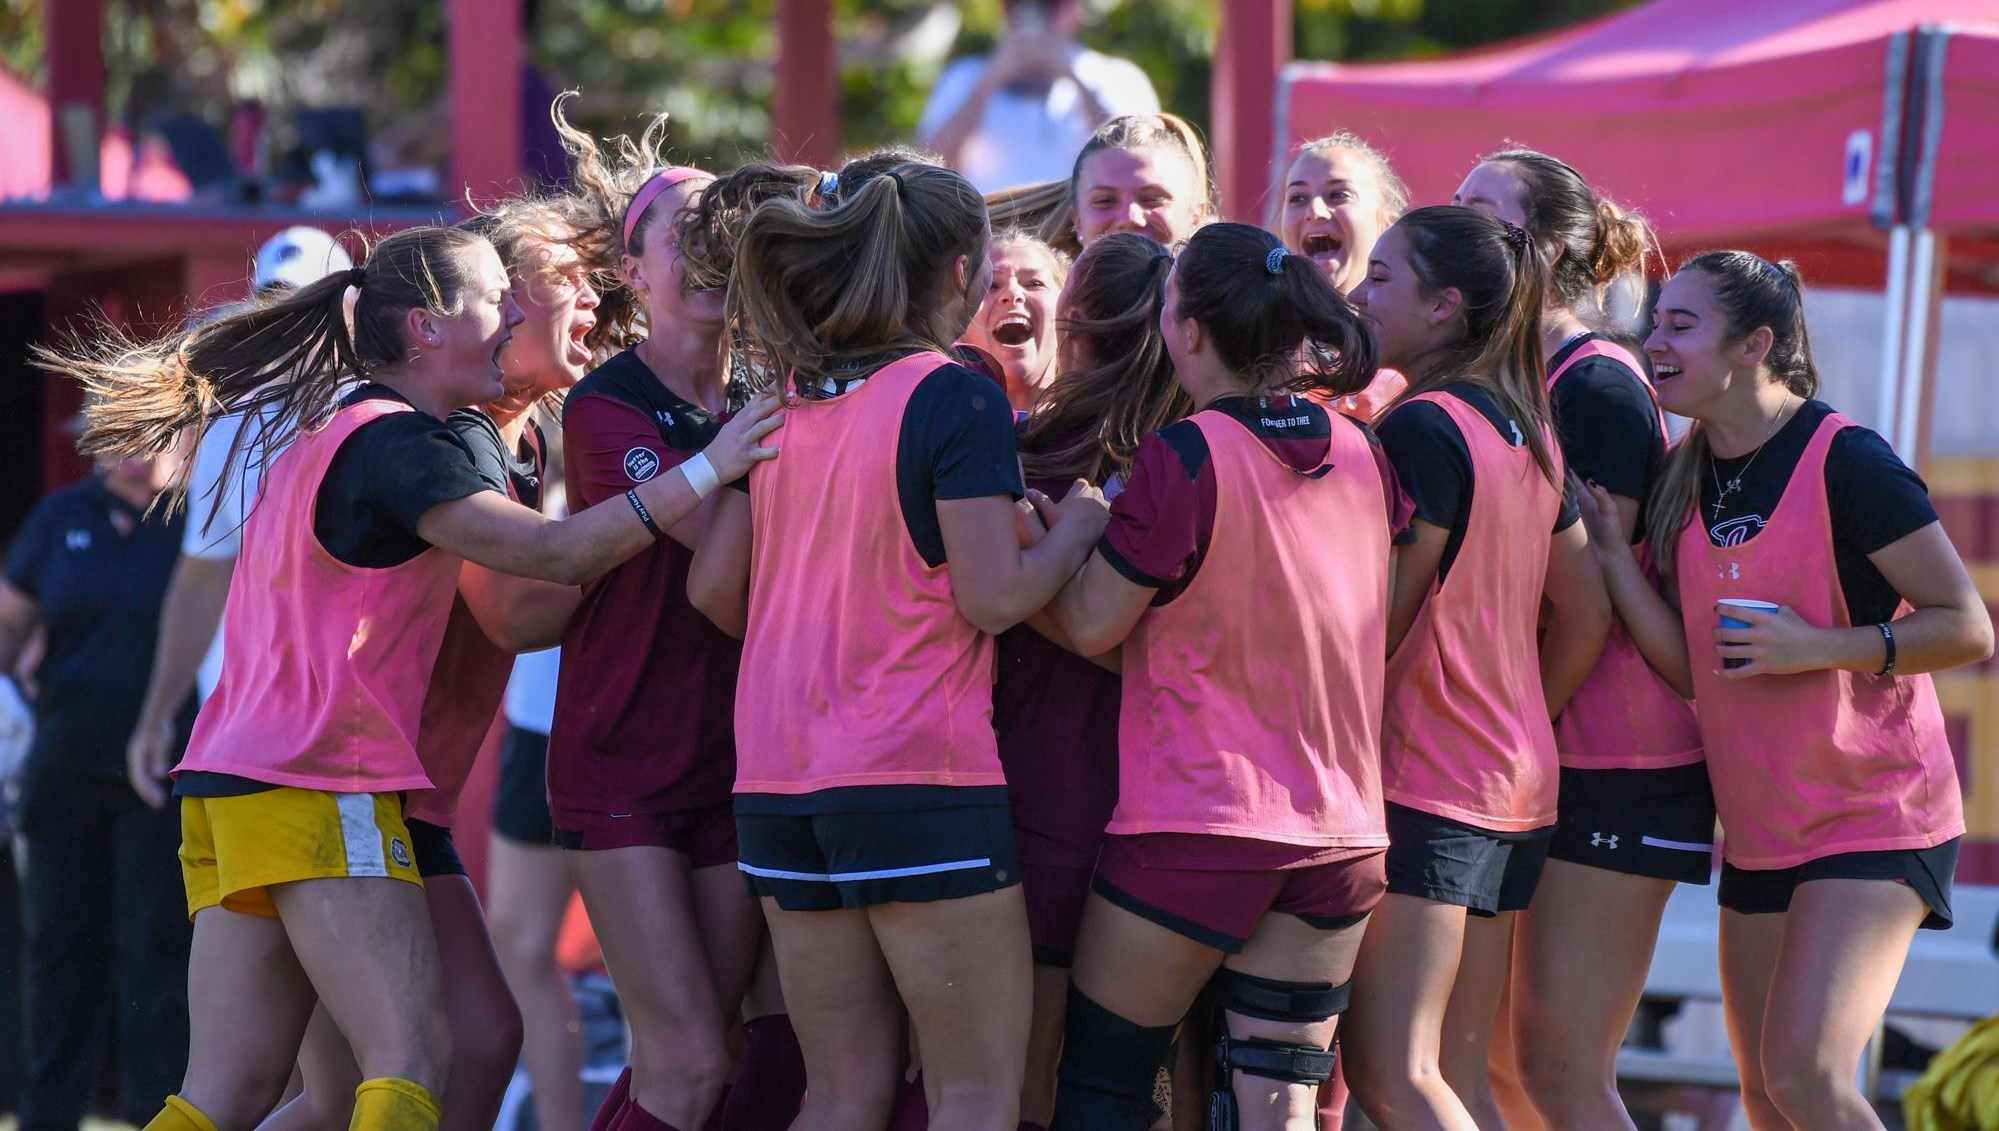 Gamecocks Headed to Elite Eight with 2-0 Win over Penn State